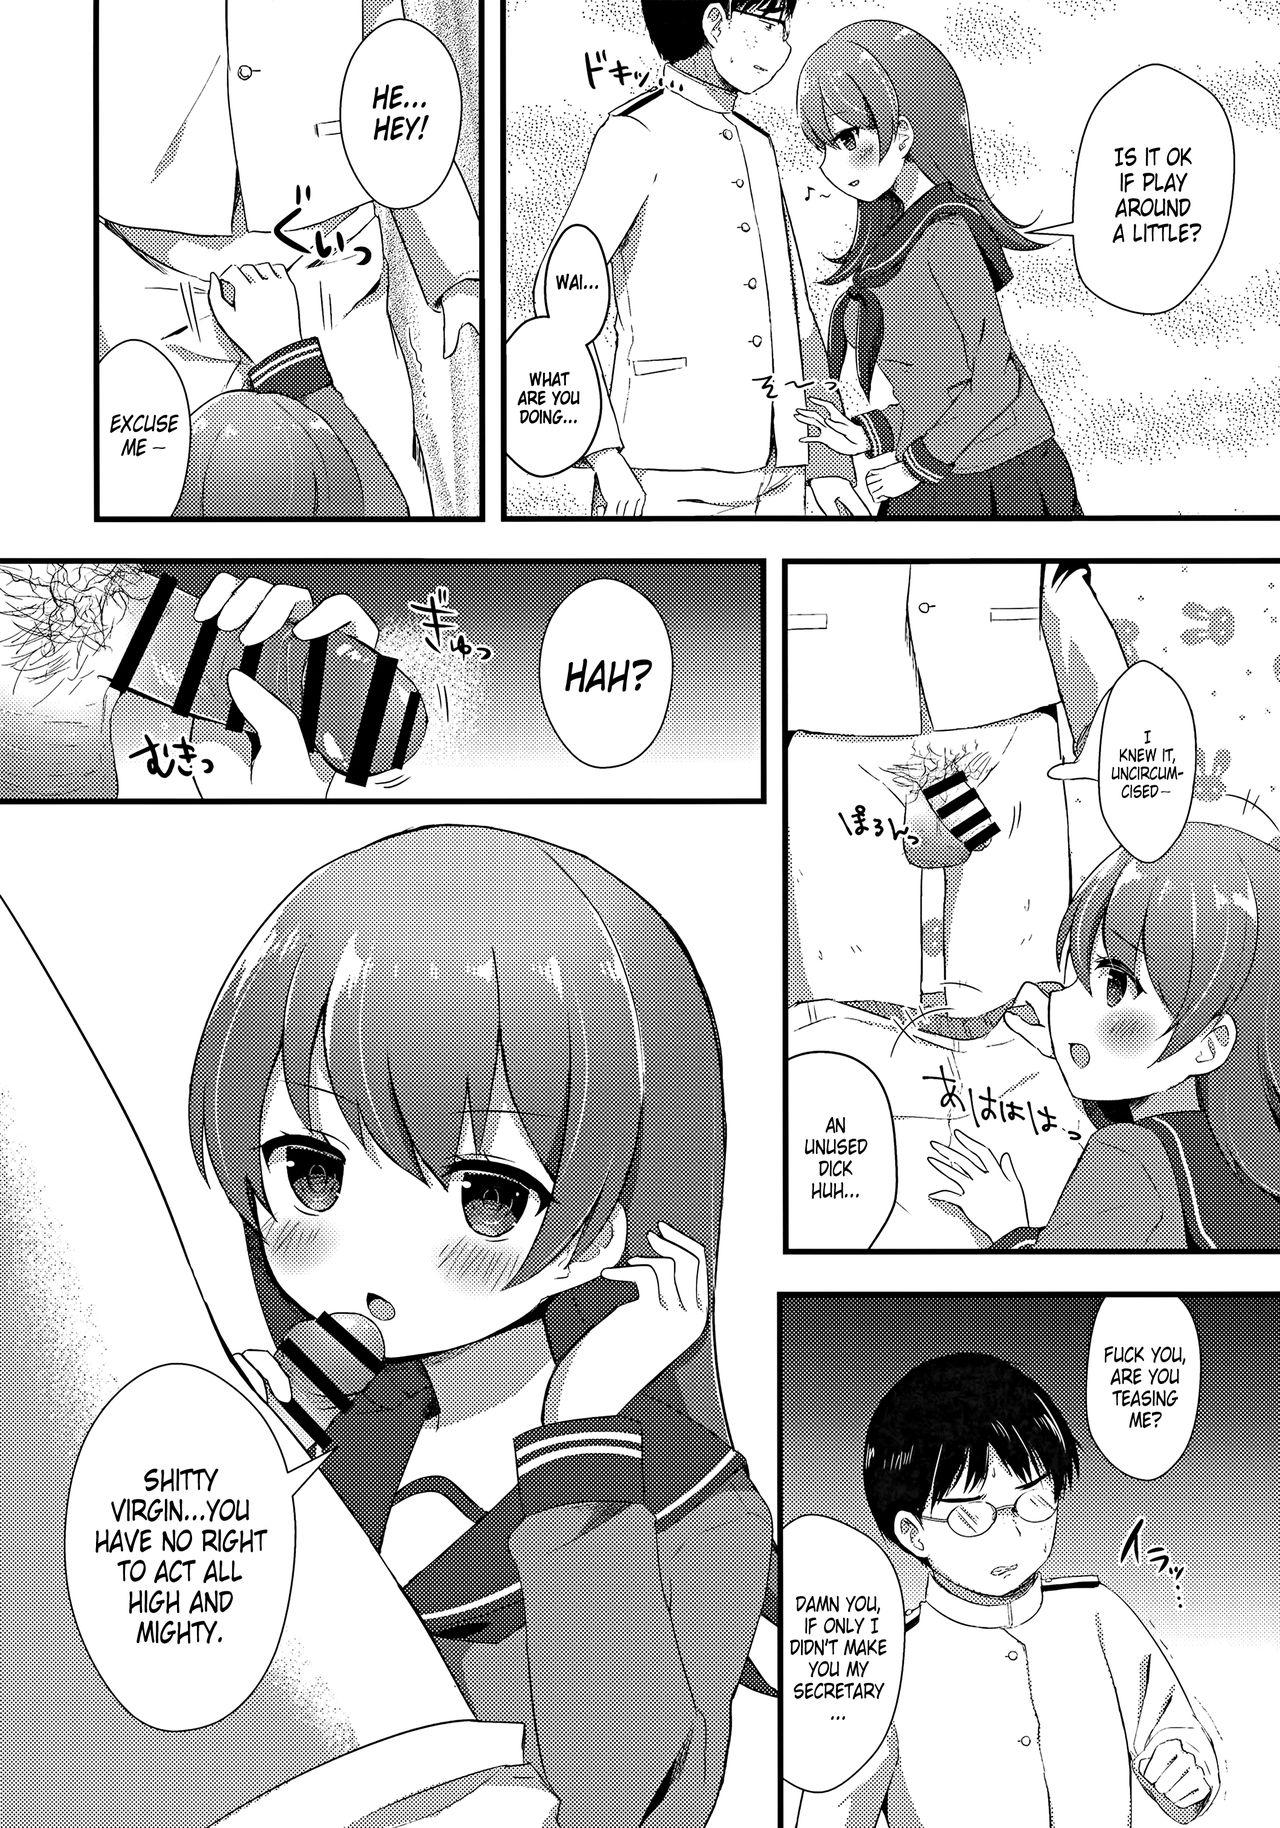 Petera Ooicchi no Ijiwaru Fudeoroshi | Ooicchi's a Meanie, A Man's First Experience - Kantai collection Latinos - Page 7